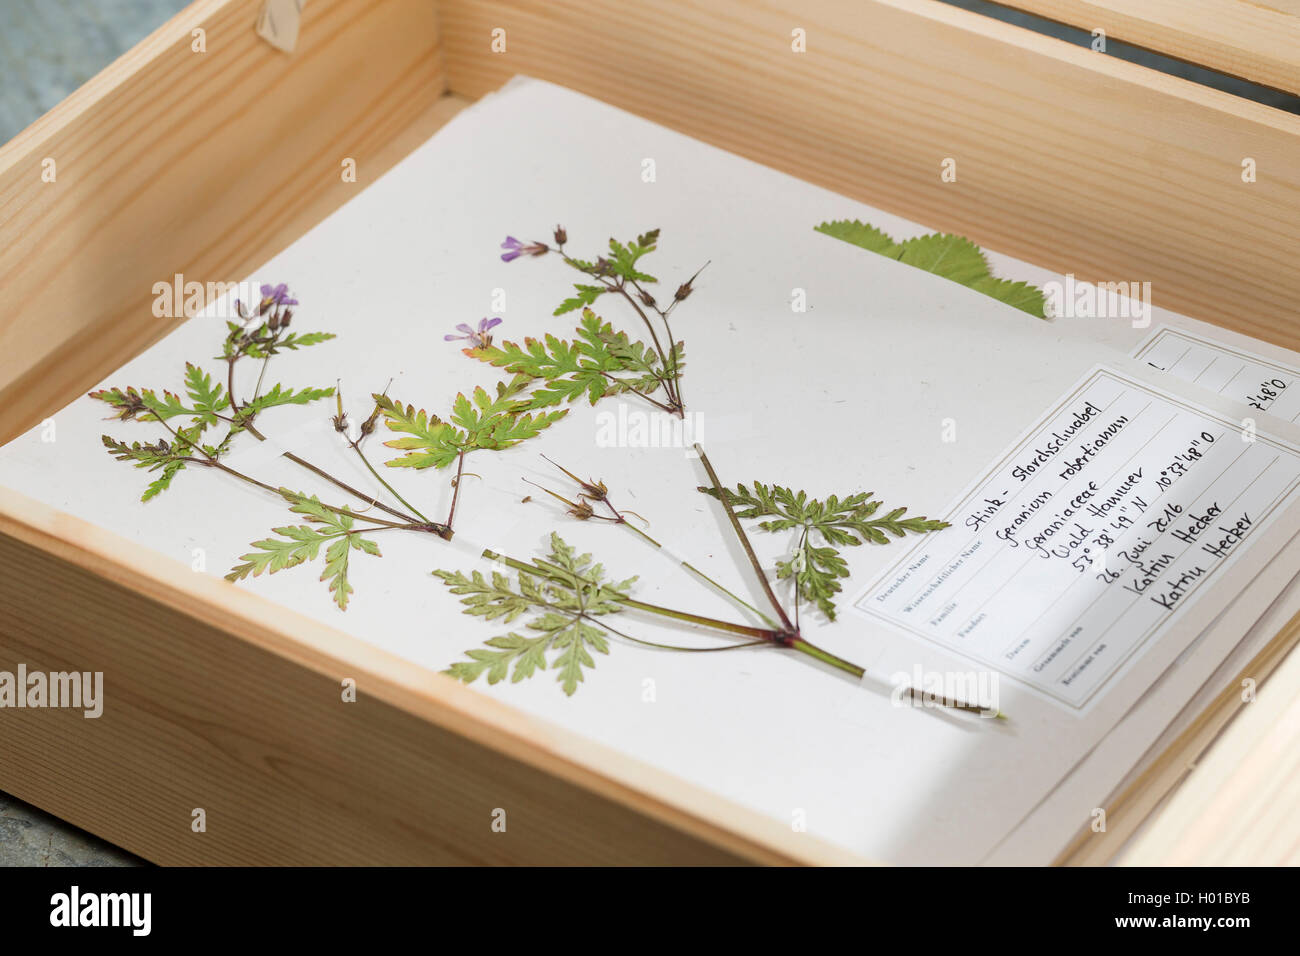 Herb Robert, Red Robin, Death come quickly, Robert Geranium (Geranium robertianum, Robertiella robertiana), ready herbarium sheet in a box, Germany Stock Photo